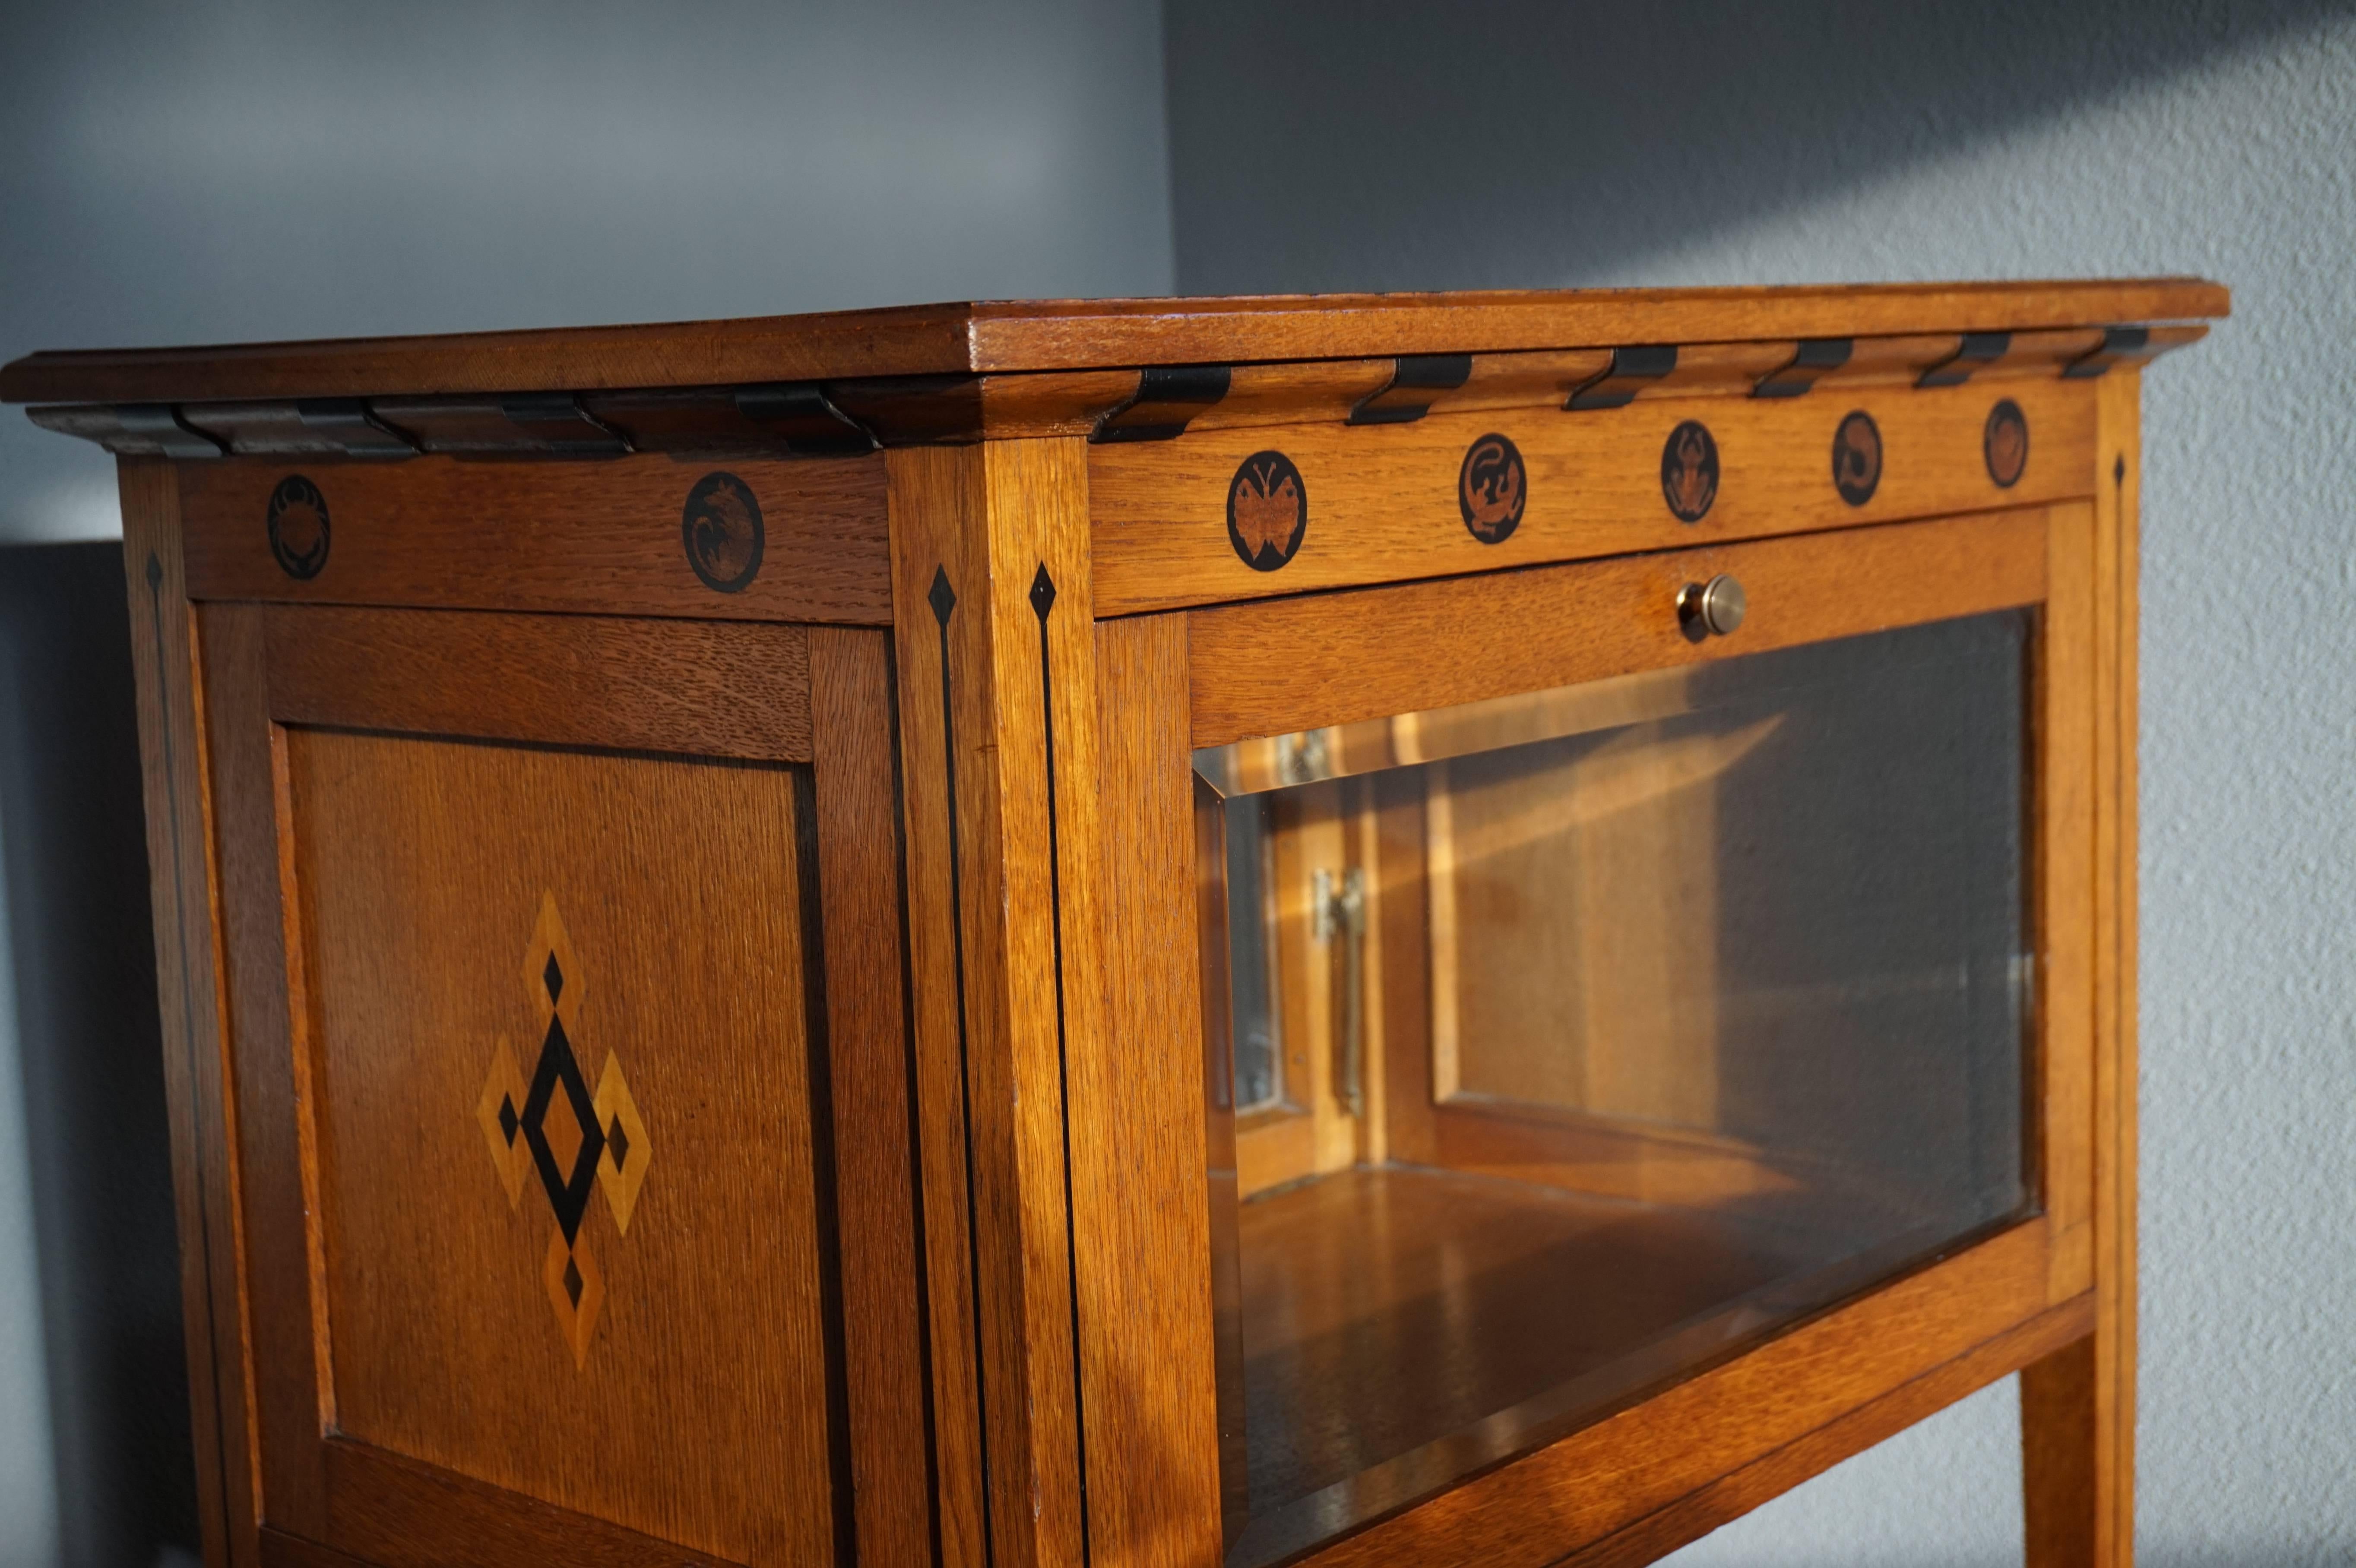 Incredible design and top quality workmanship from Amsterdam from the early 1900's.

As promised in one of our other listings, here is the original and unique display or tea cabinet from 't Modelhuis by Jewish maker Napoleon le Grand. From the same